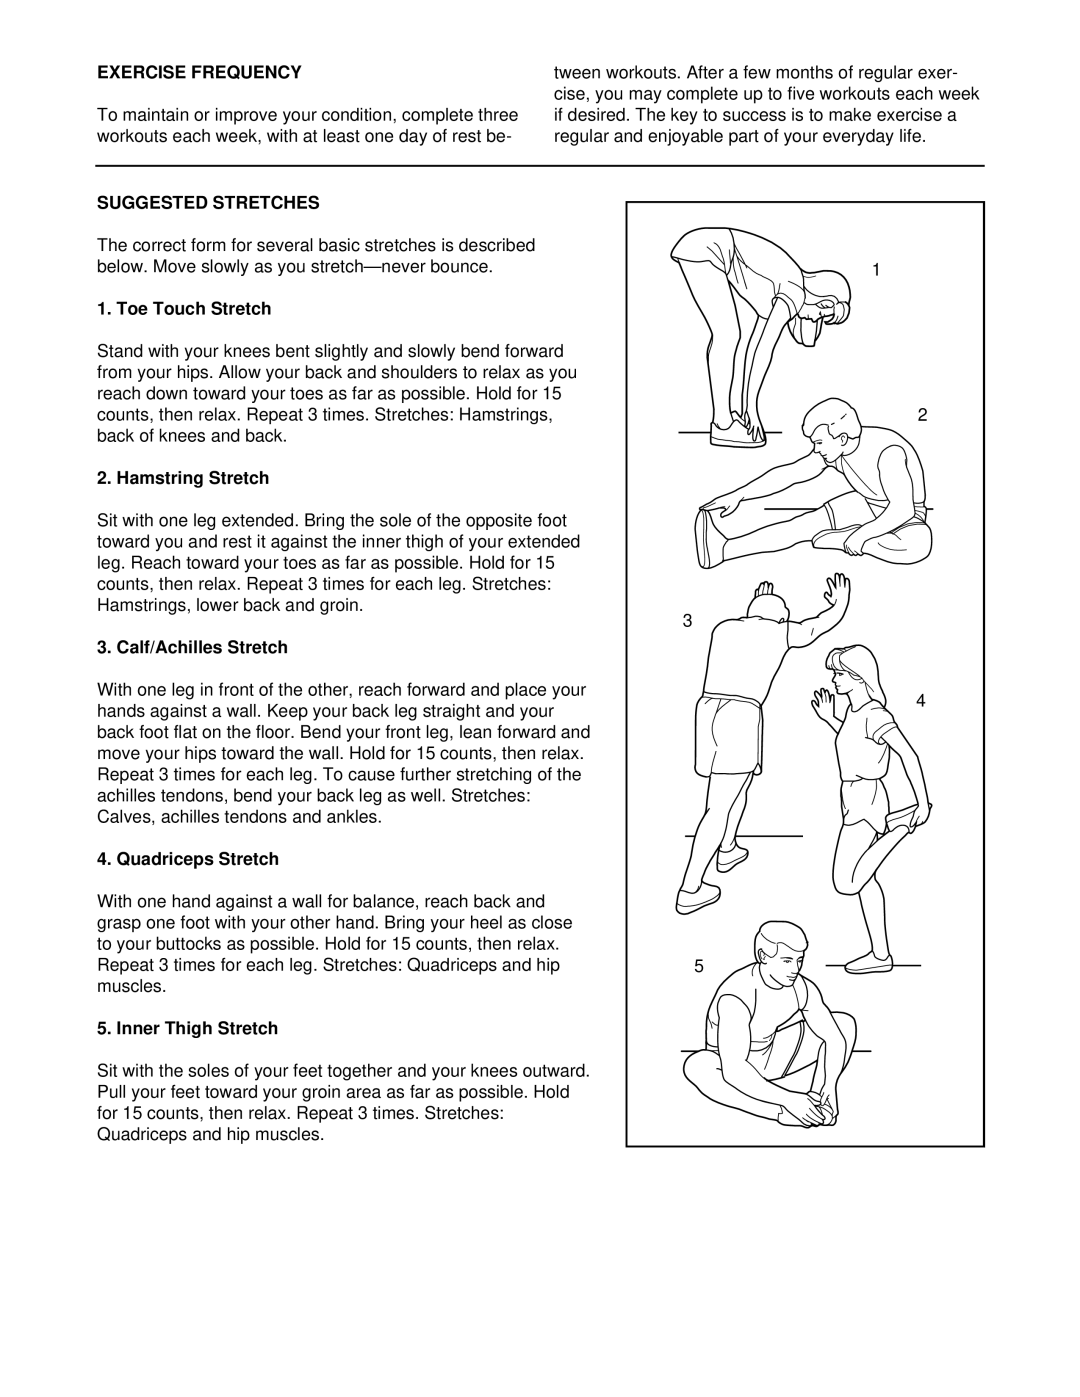 ProForm PFTL49101 Exercise Frequency, Suggested Stretches, Toe Touch Stretch, Hamstring Stretch, Calf/Achilles Stretch 